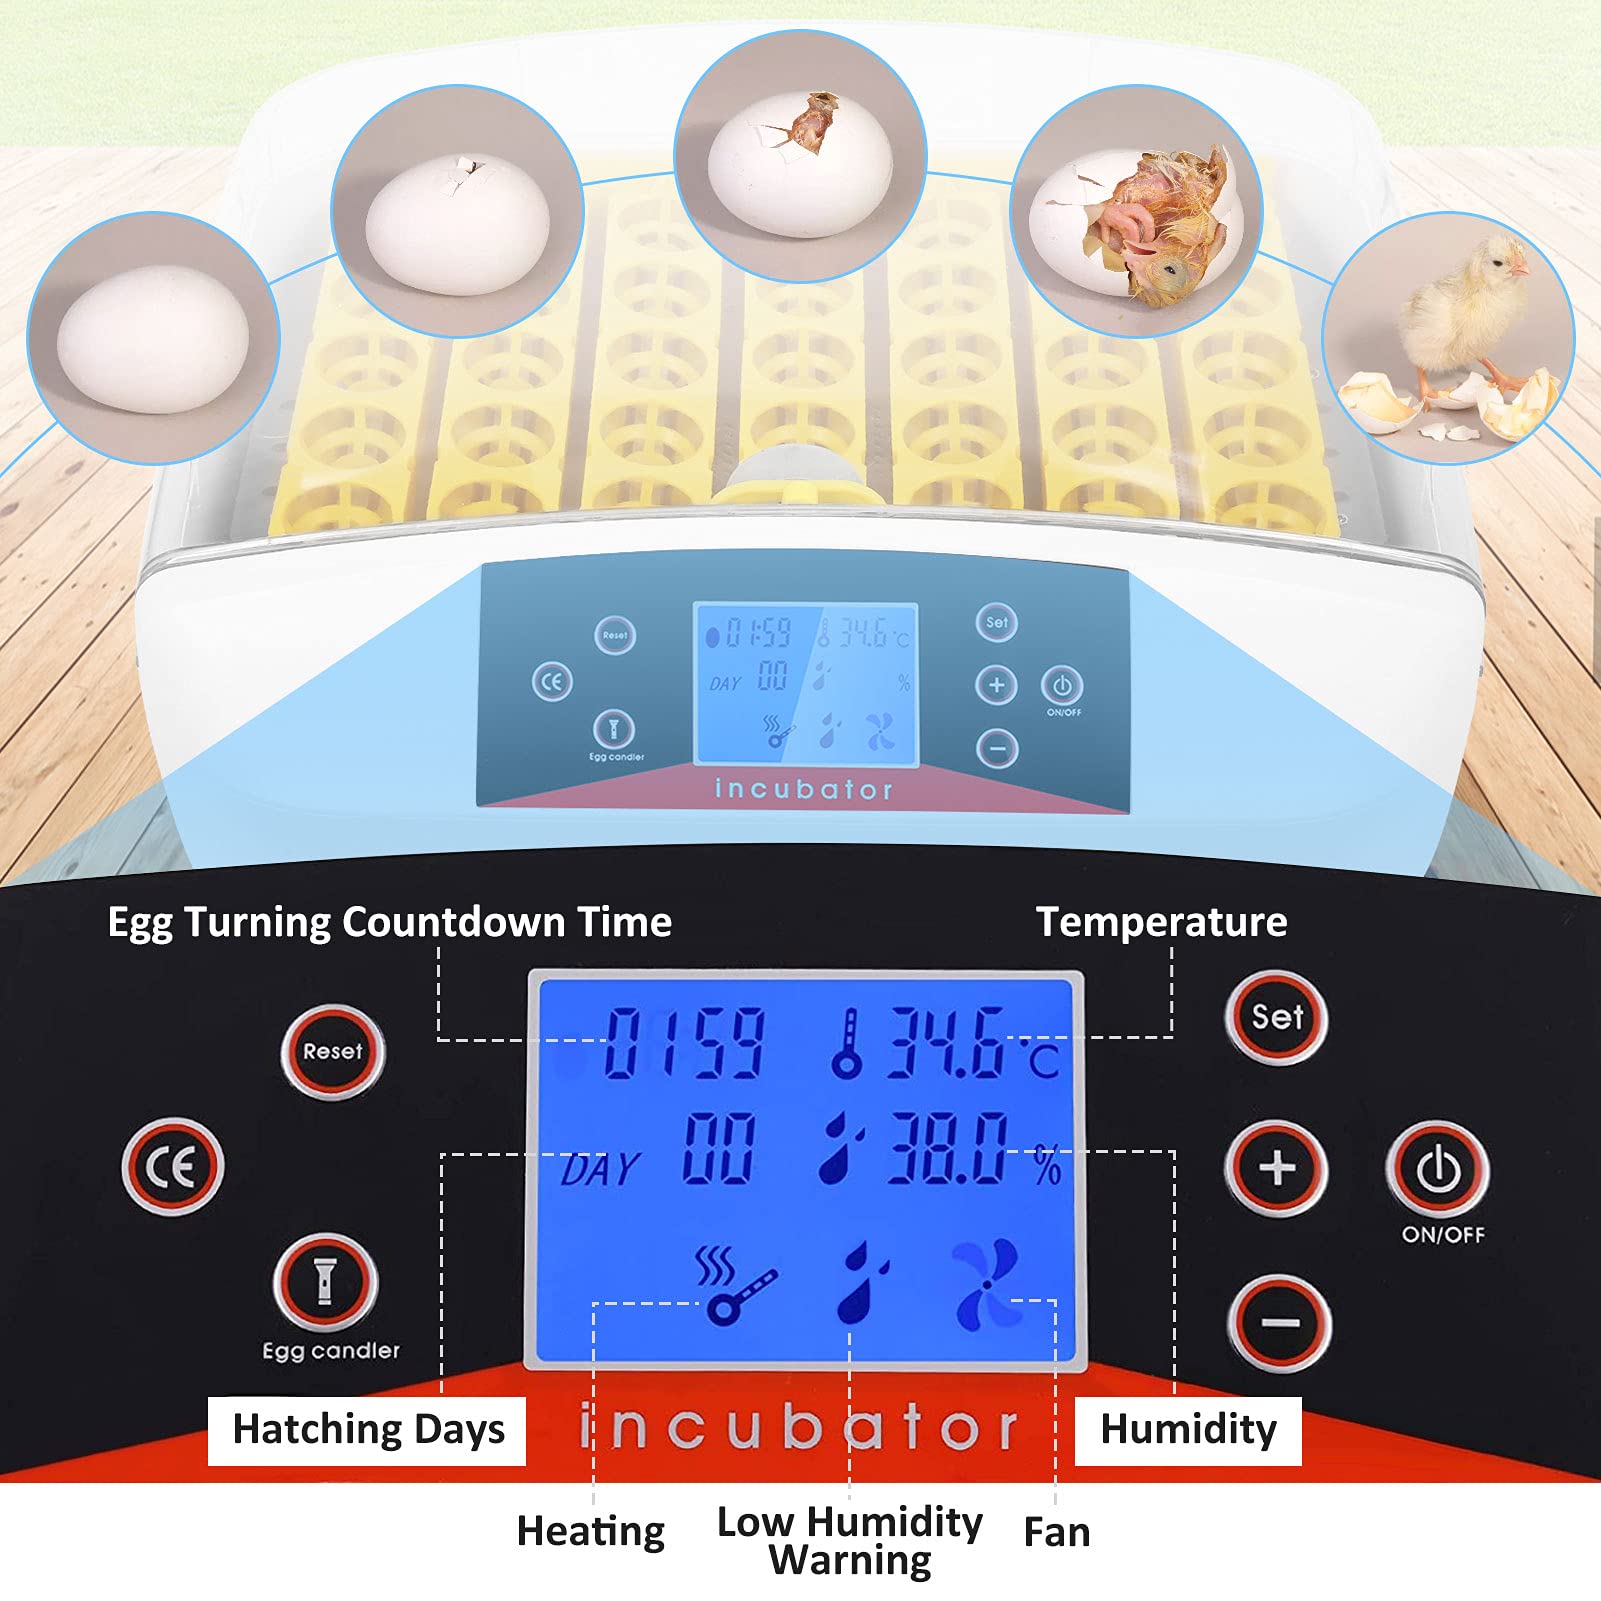 41 Egg Incubator Poultry Hatching Machine with Temperature Control Small General Digital Incubator Breeder Hatcher